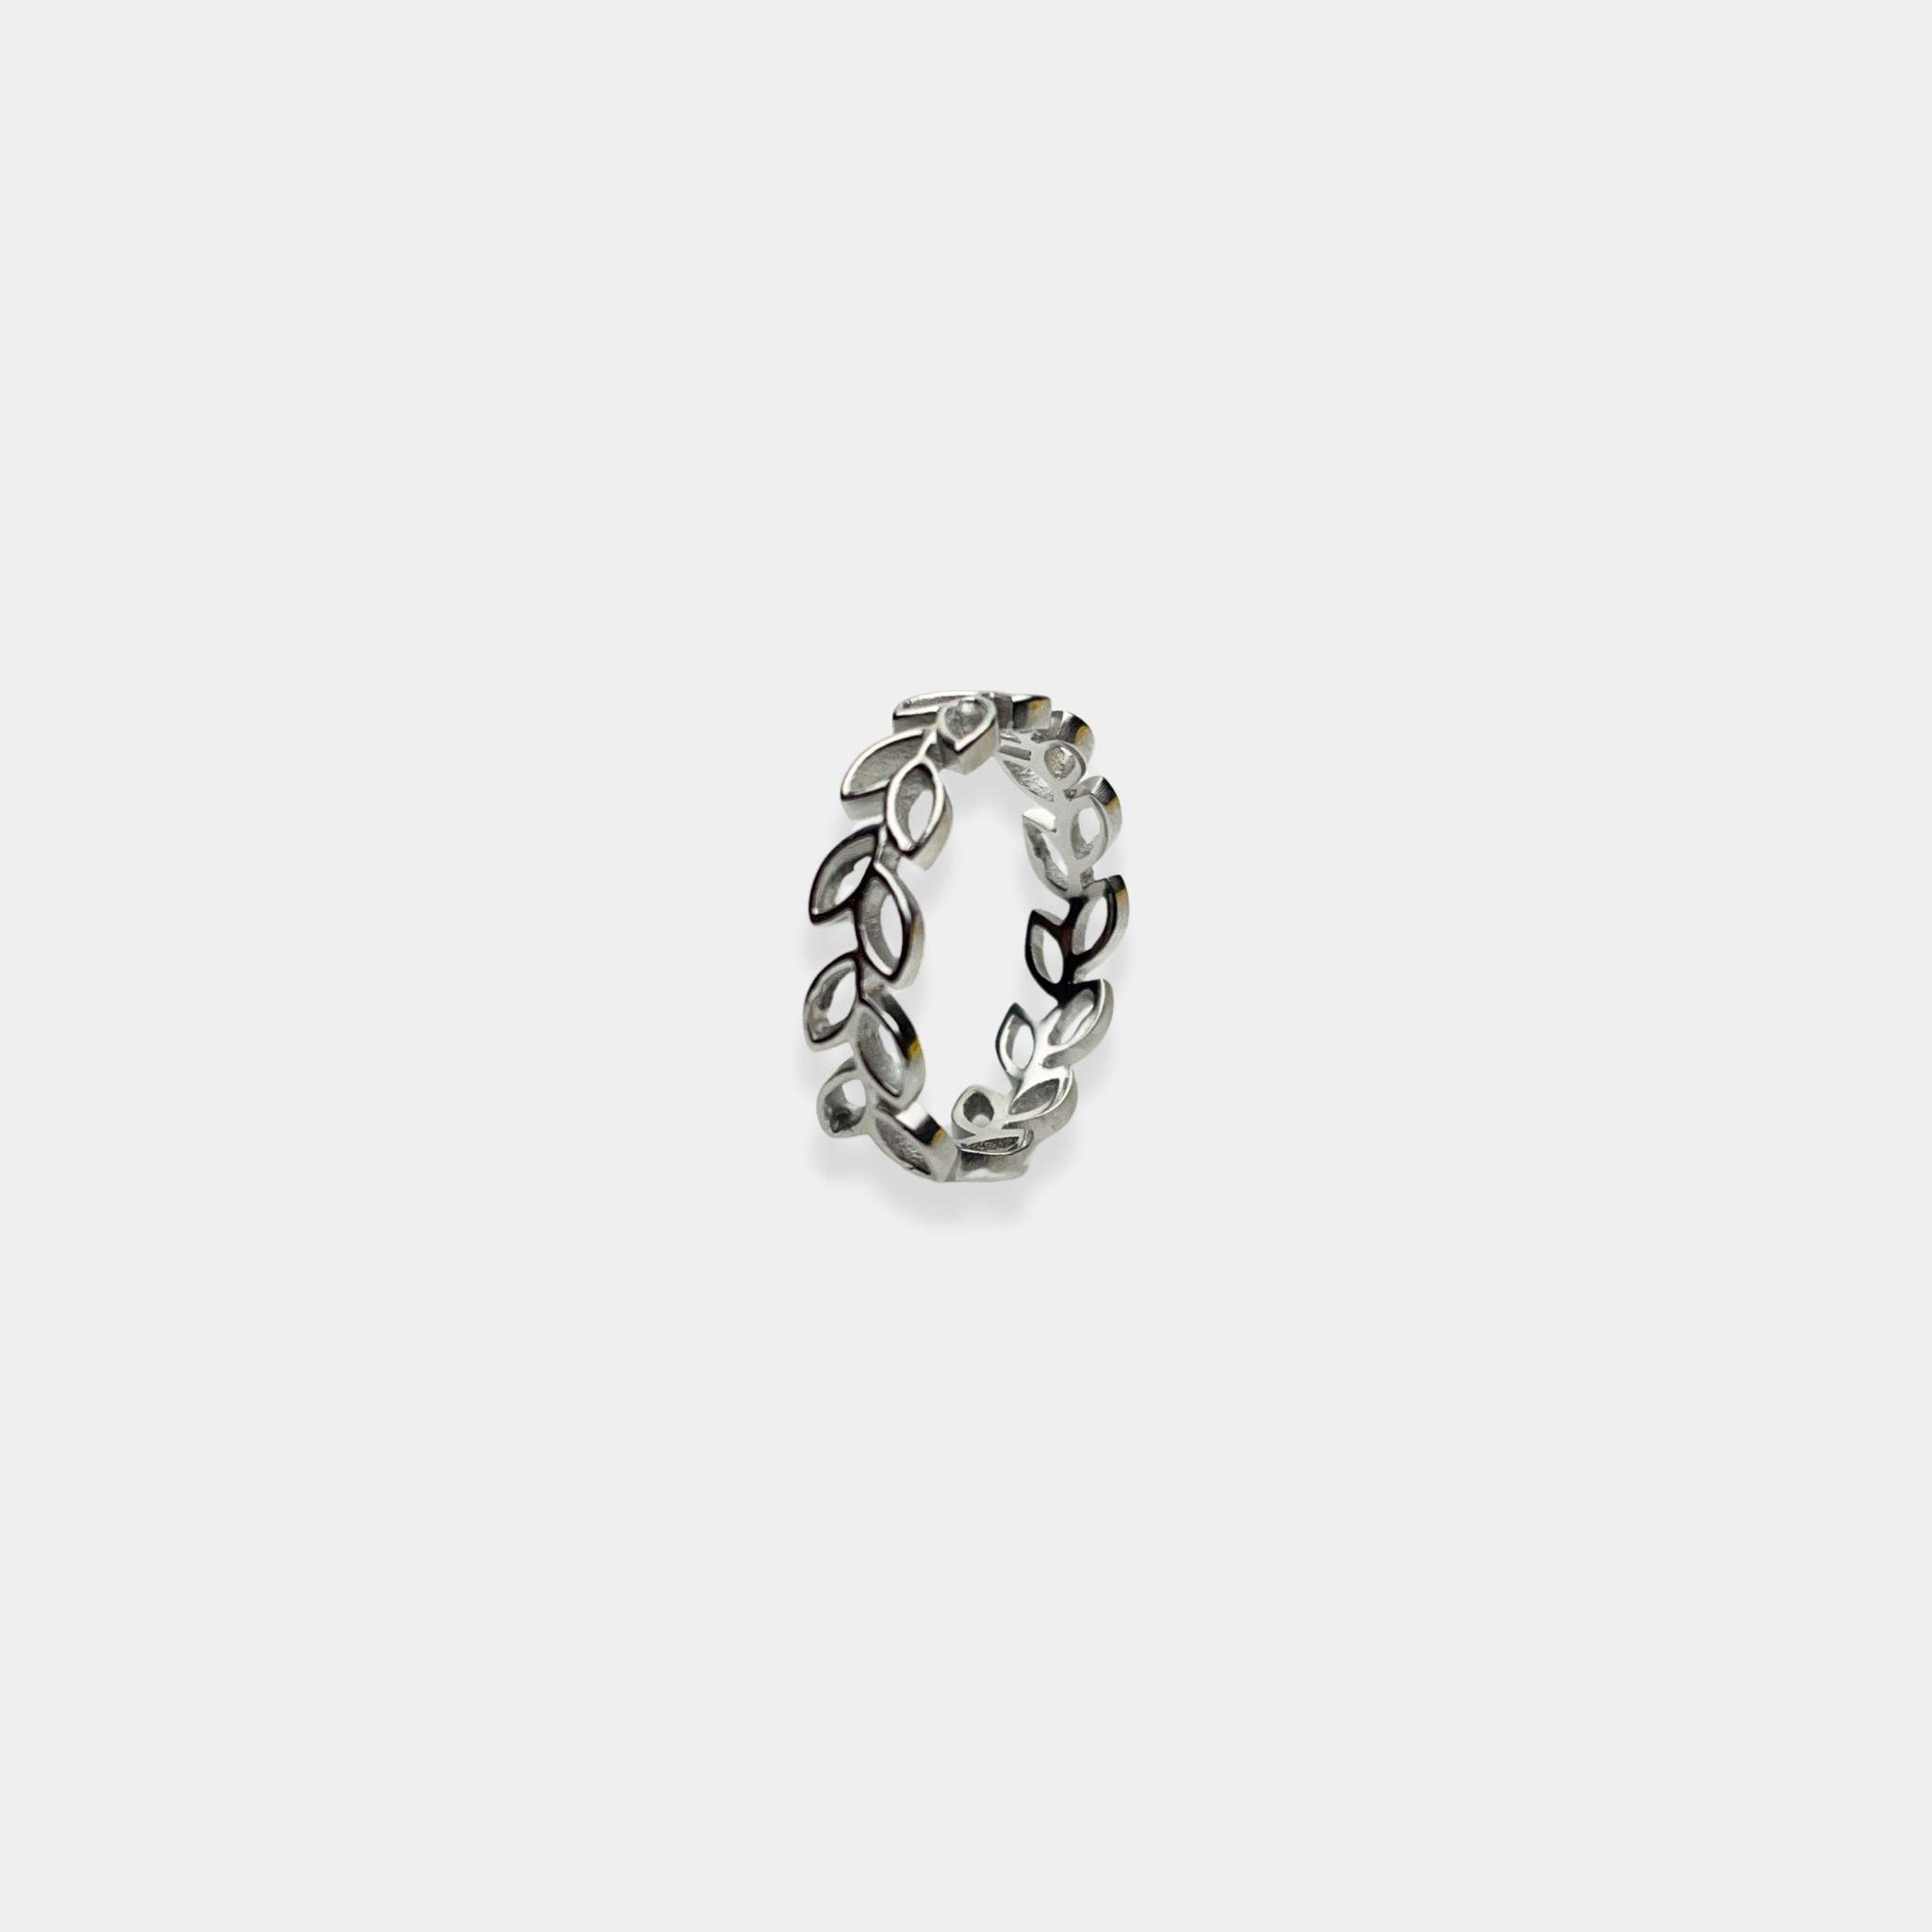  A beautiful silver ring adorned with delicate leaves, perfect for adding a touch of nature to your style